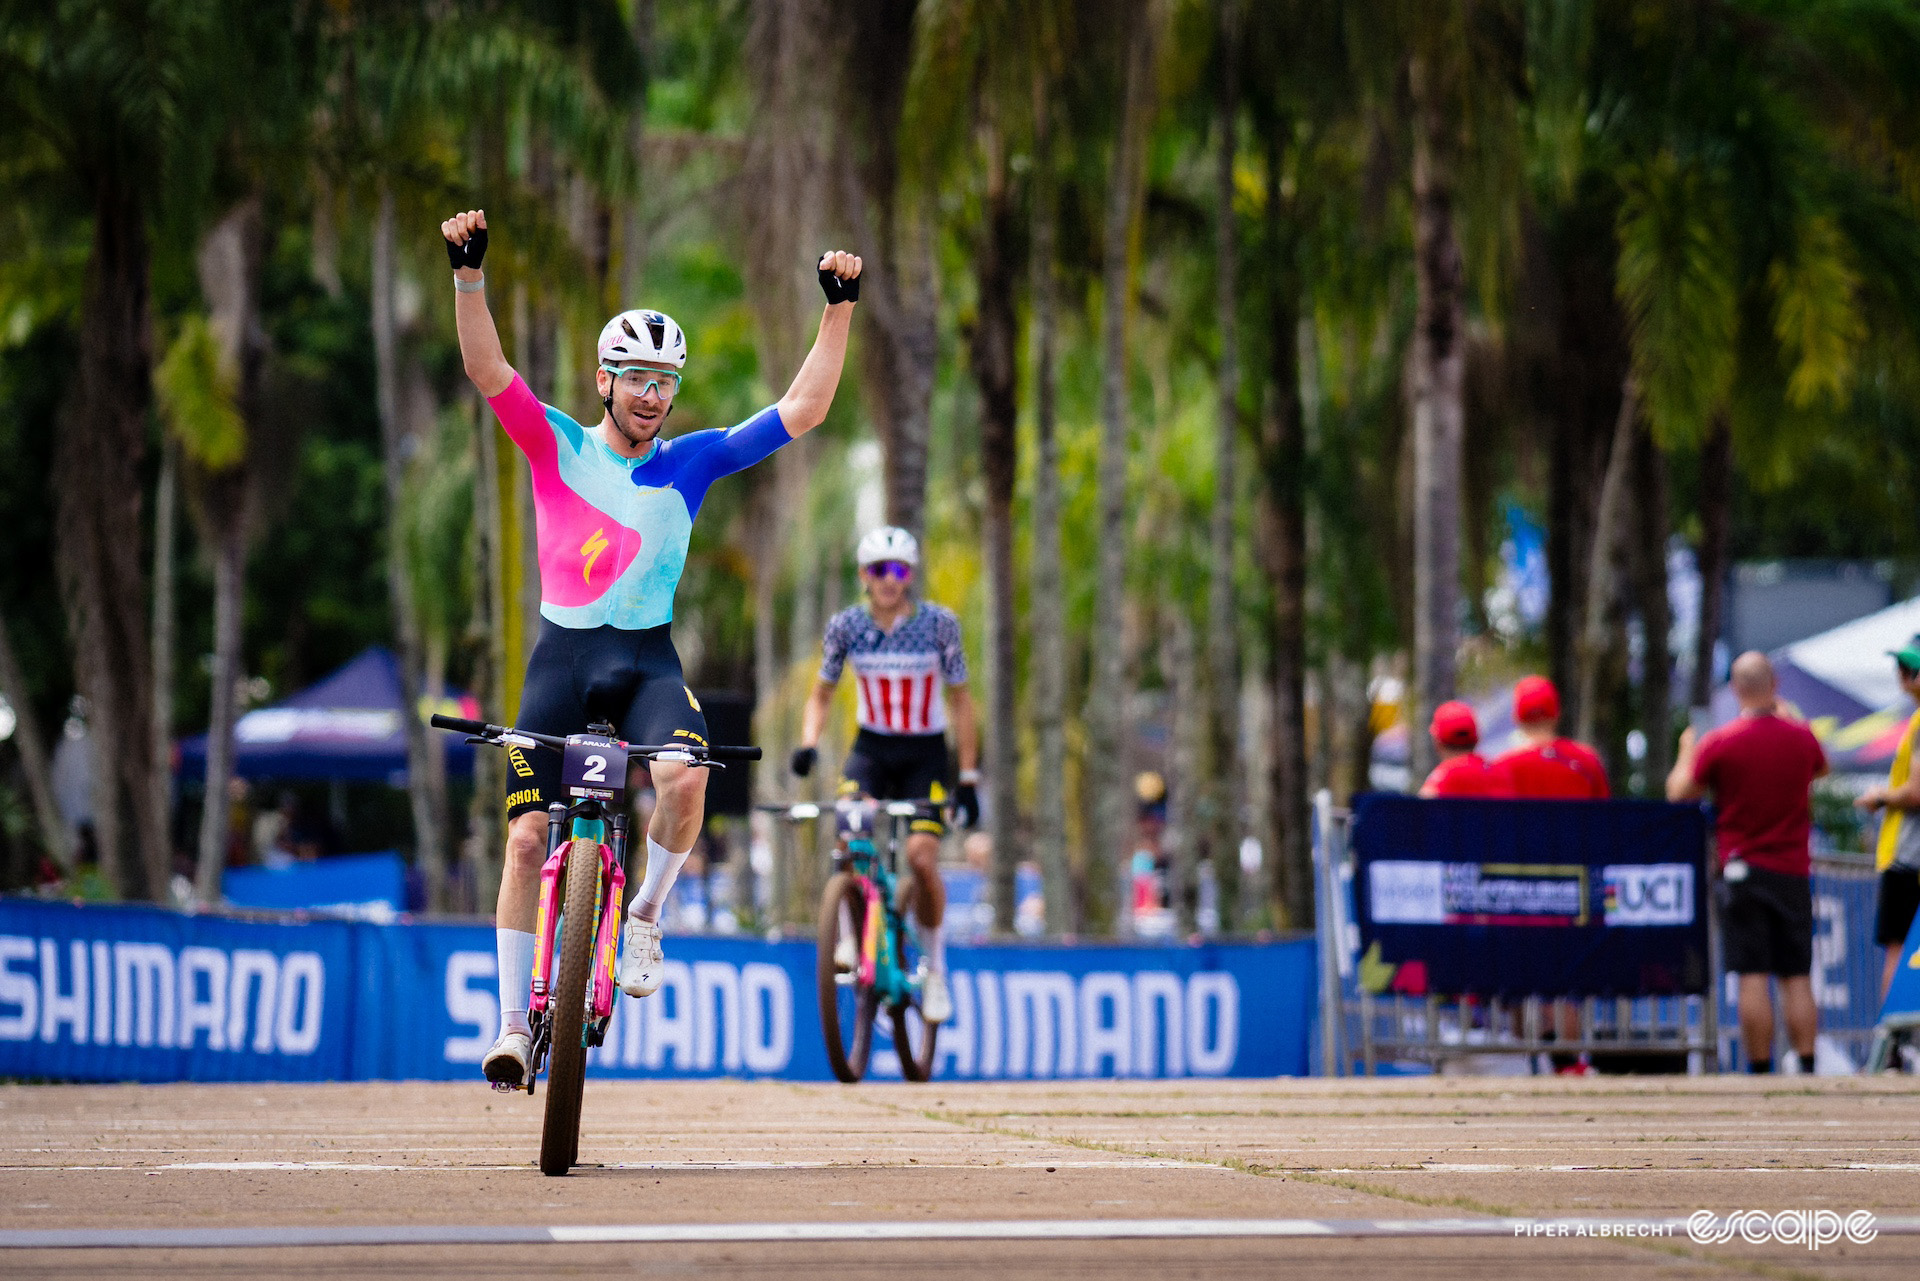 Victor Koretzky raises his arms in celebrations at winning mountain bike World Cup short track in Araxá, Brazil.